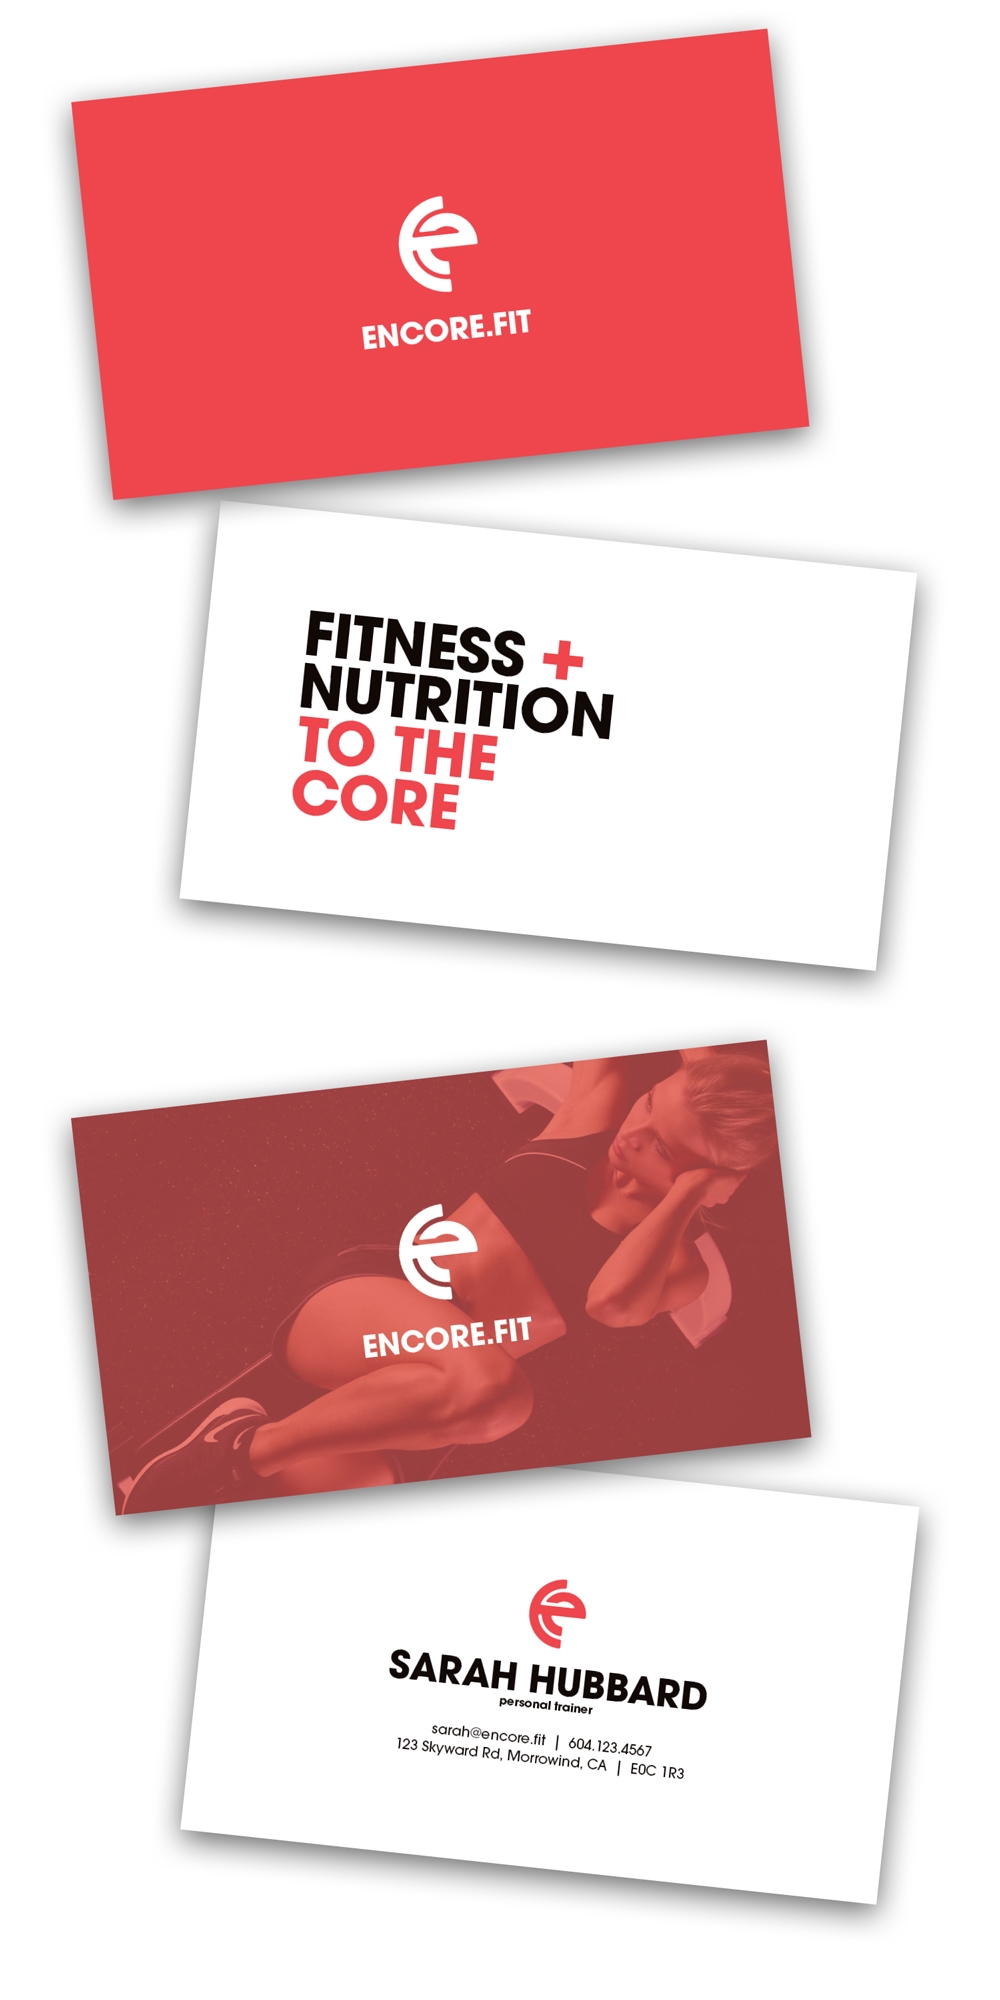 Encore fitness business cards